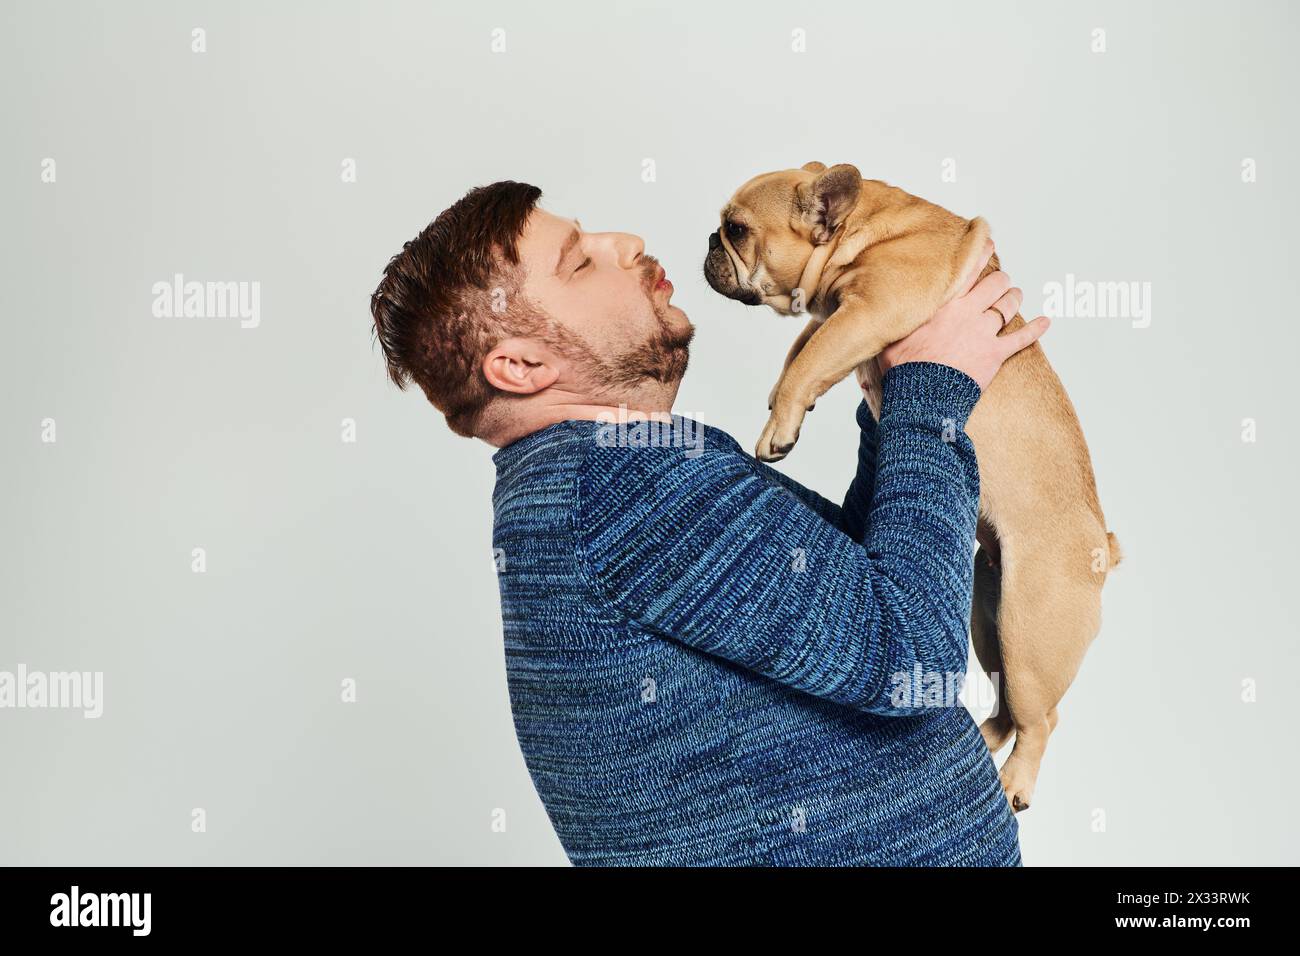 A man lovingly holds a French Bulldog up to his face. Stock Photo